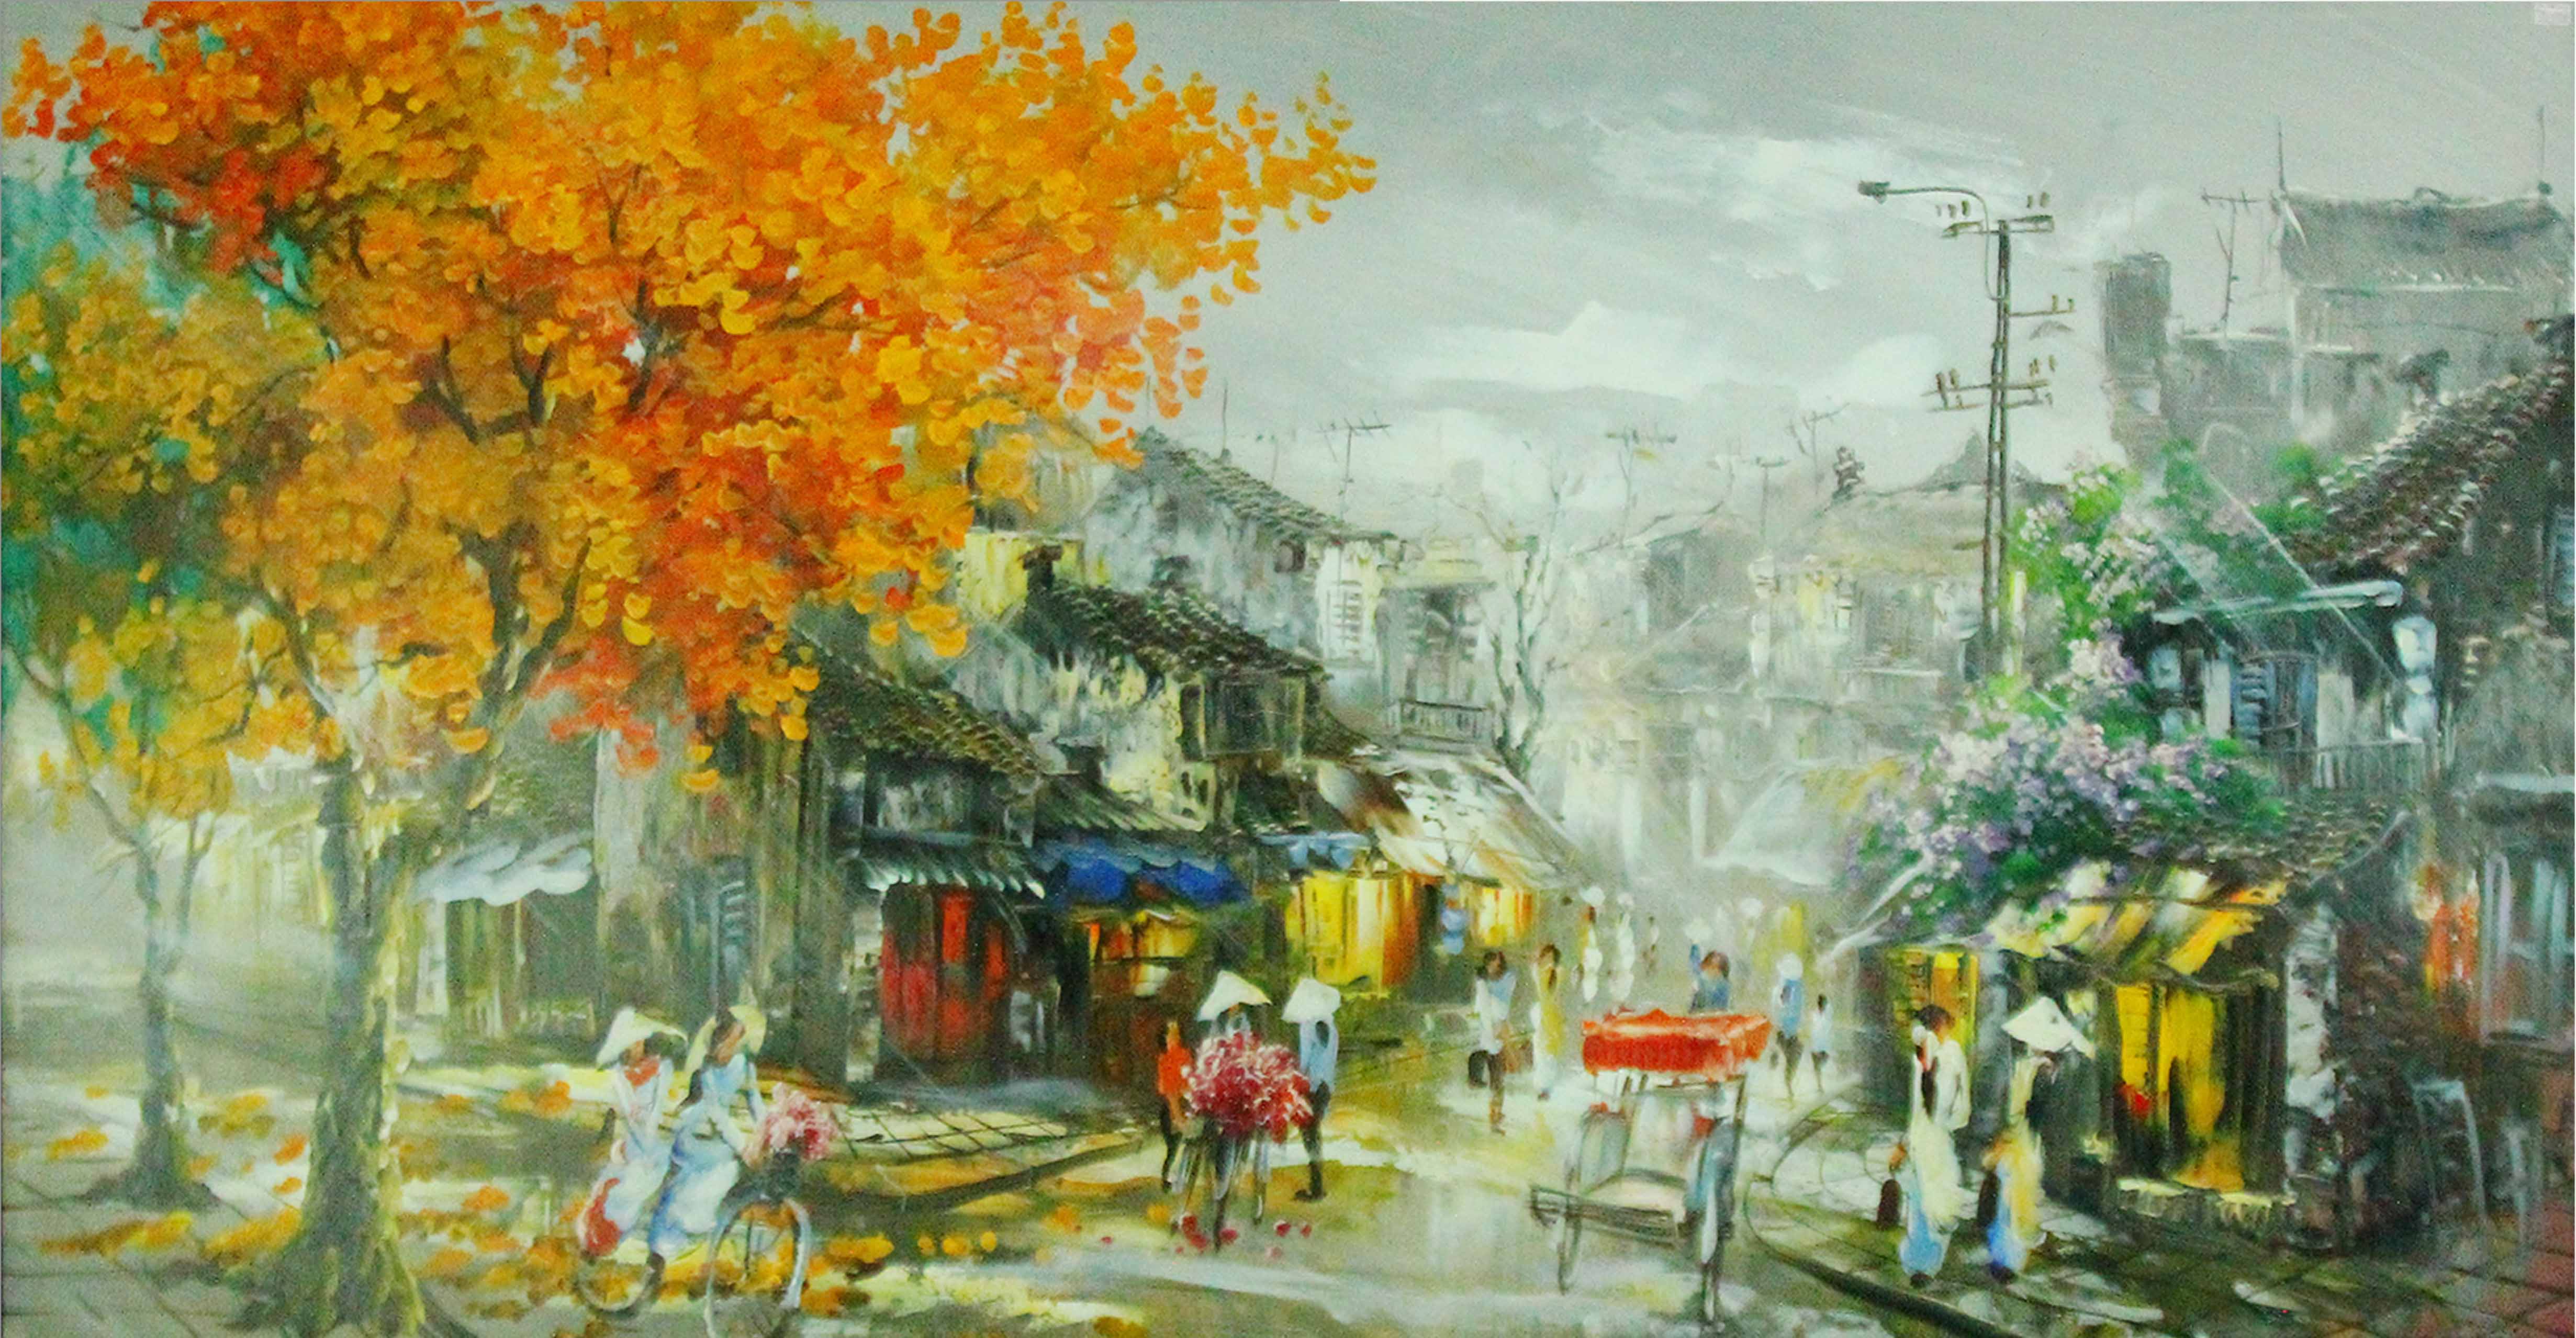 Oil painting of Old town - TSD38LHAR